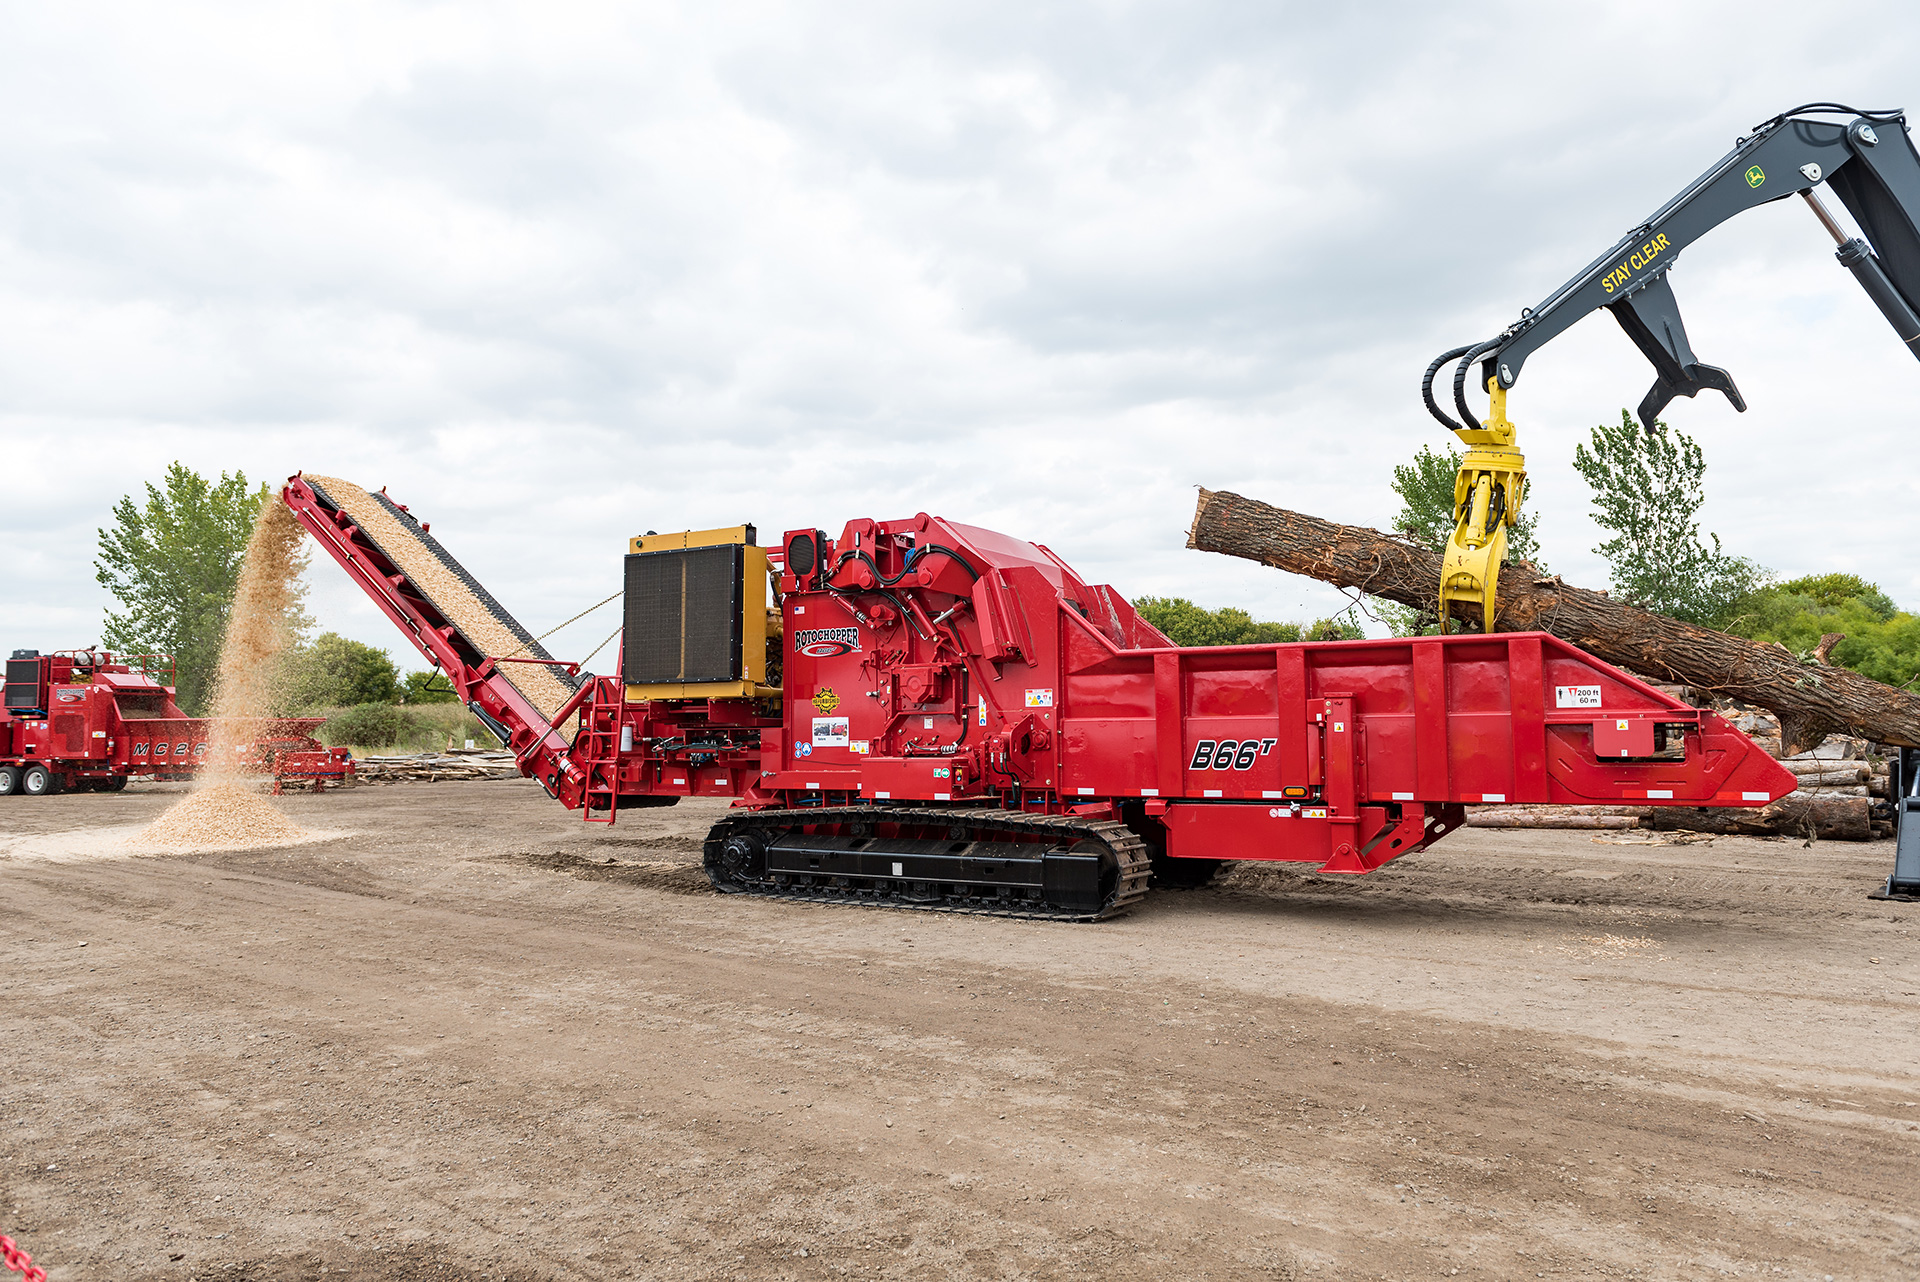 refurbished b66t chipper package